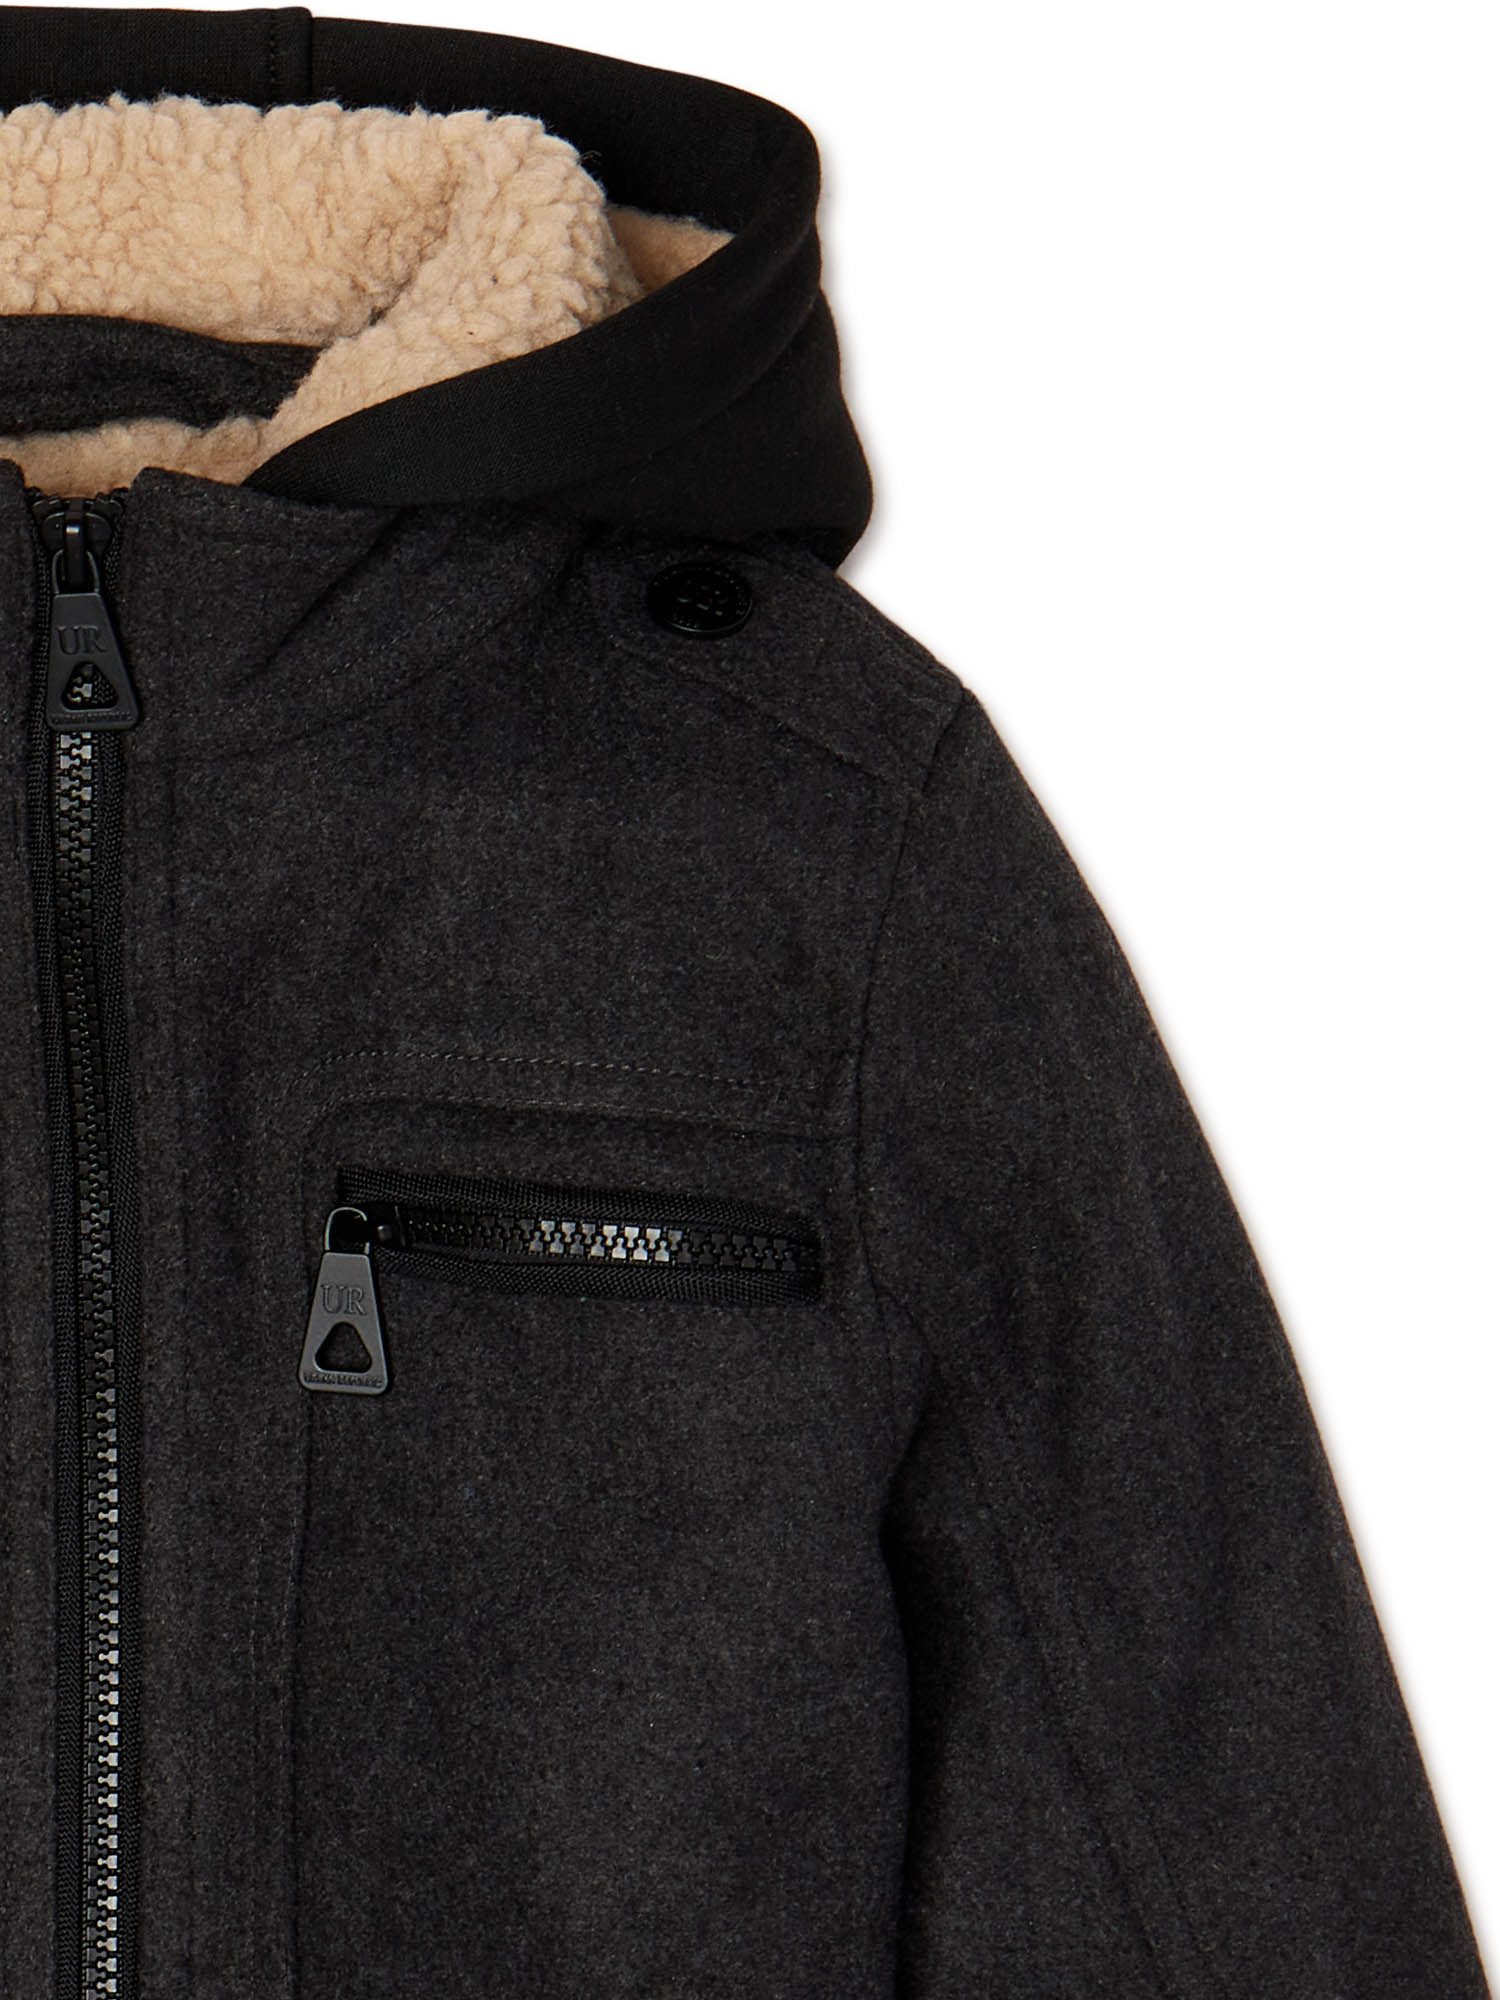 Urban Republic Boys Officer Jacket with Faux Sherpa Hood & Lining, Sizes 4-20 - image 3 of 3